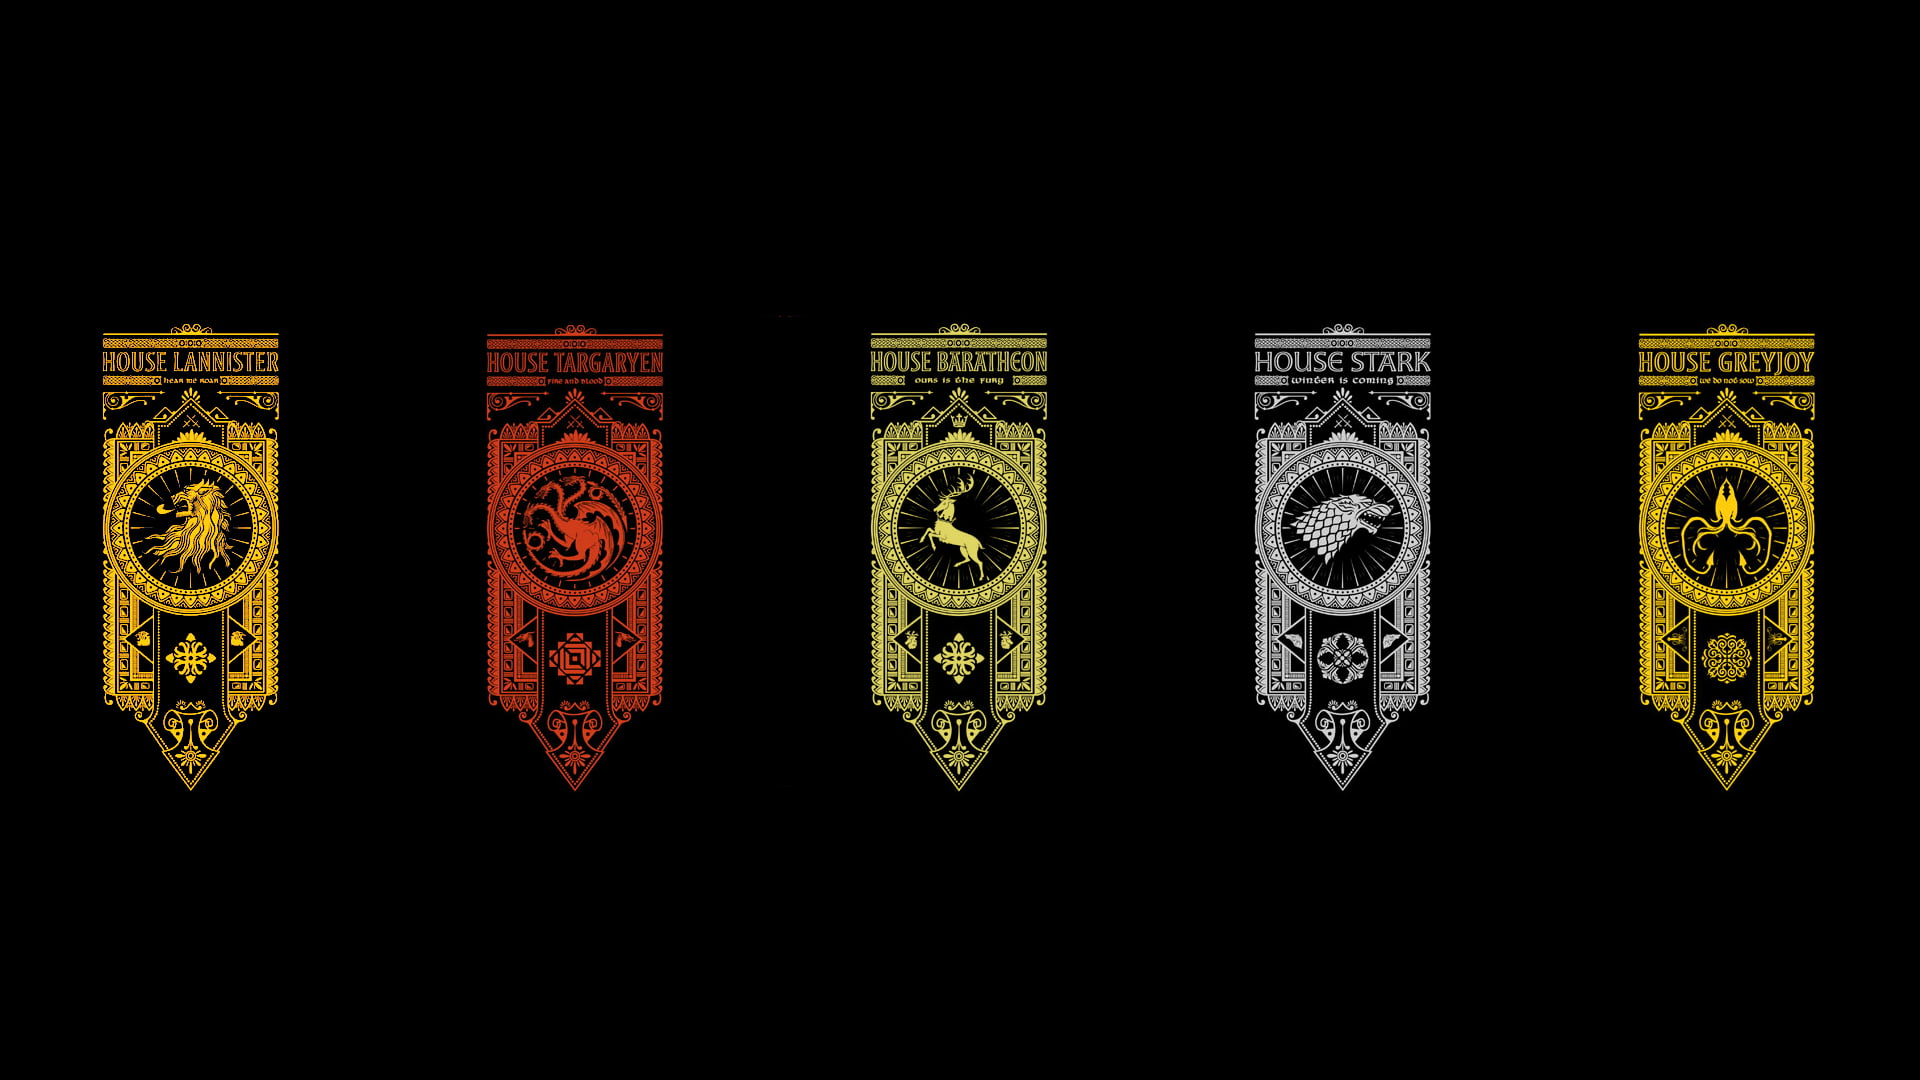 Game of Thrones wallpapers, Game of Thrones, sigils